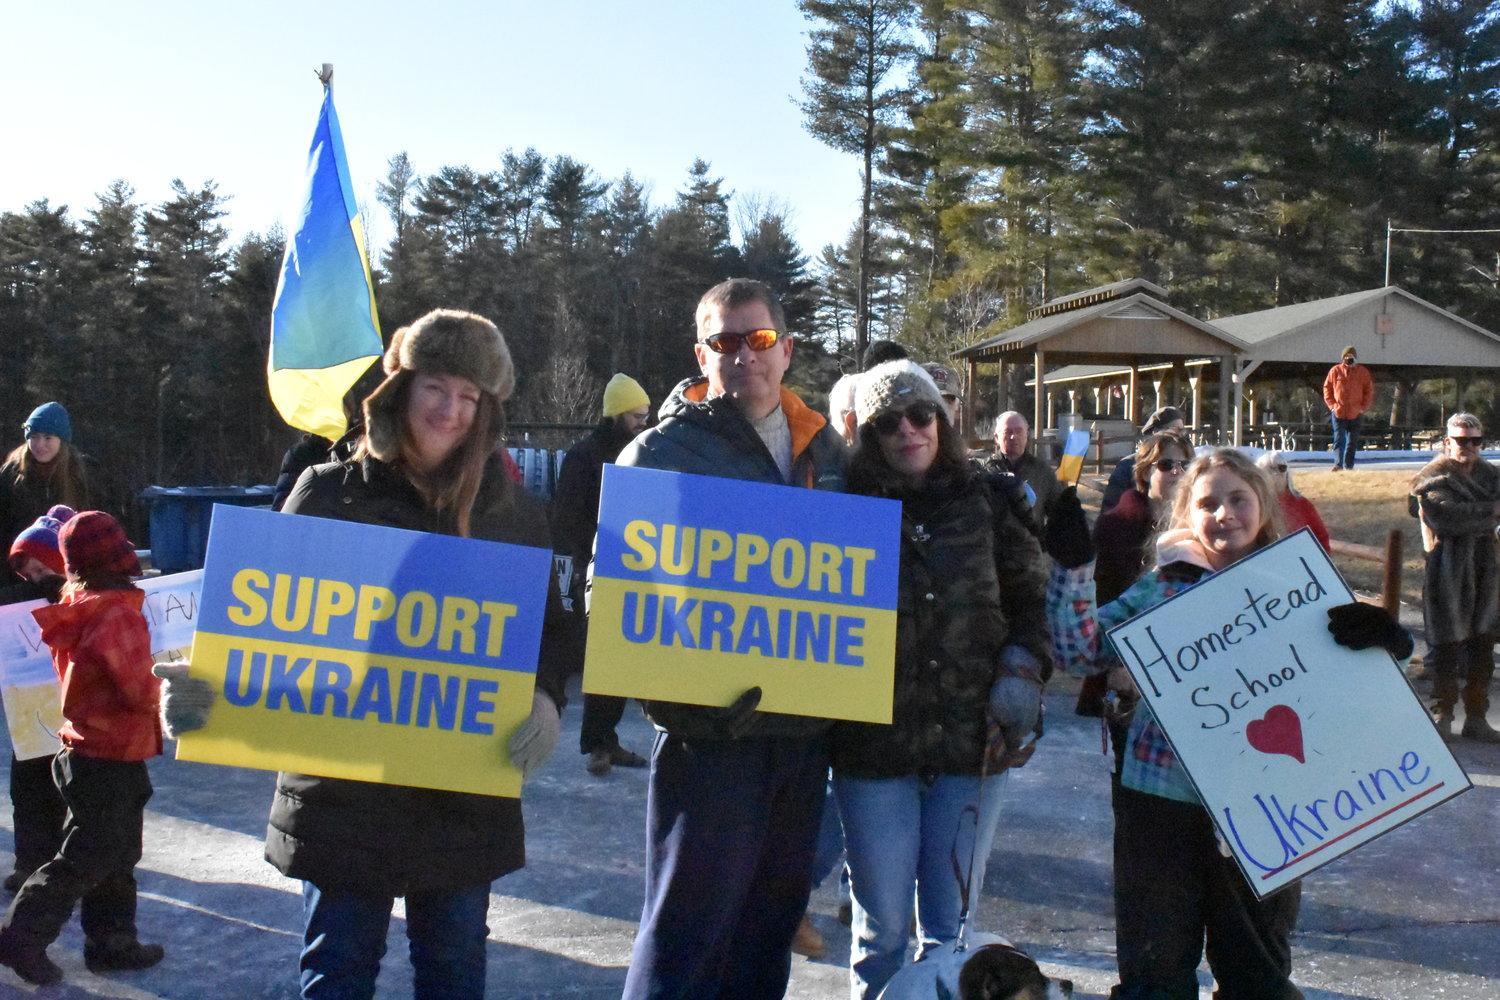 The Homestead School students and their families were in attendance at the Friday afternoon rally in support of Ukraine.